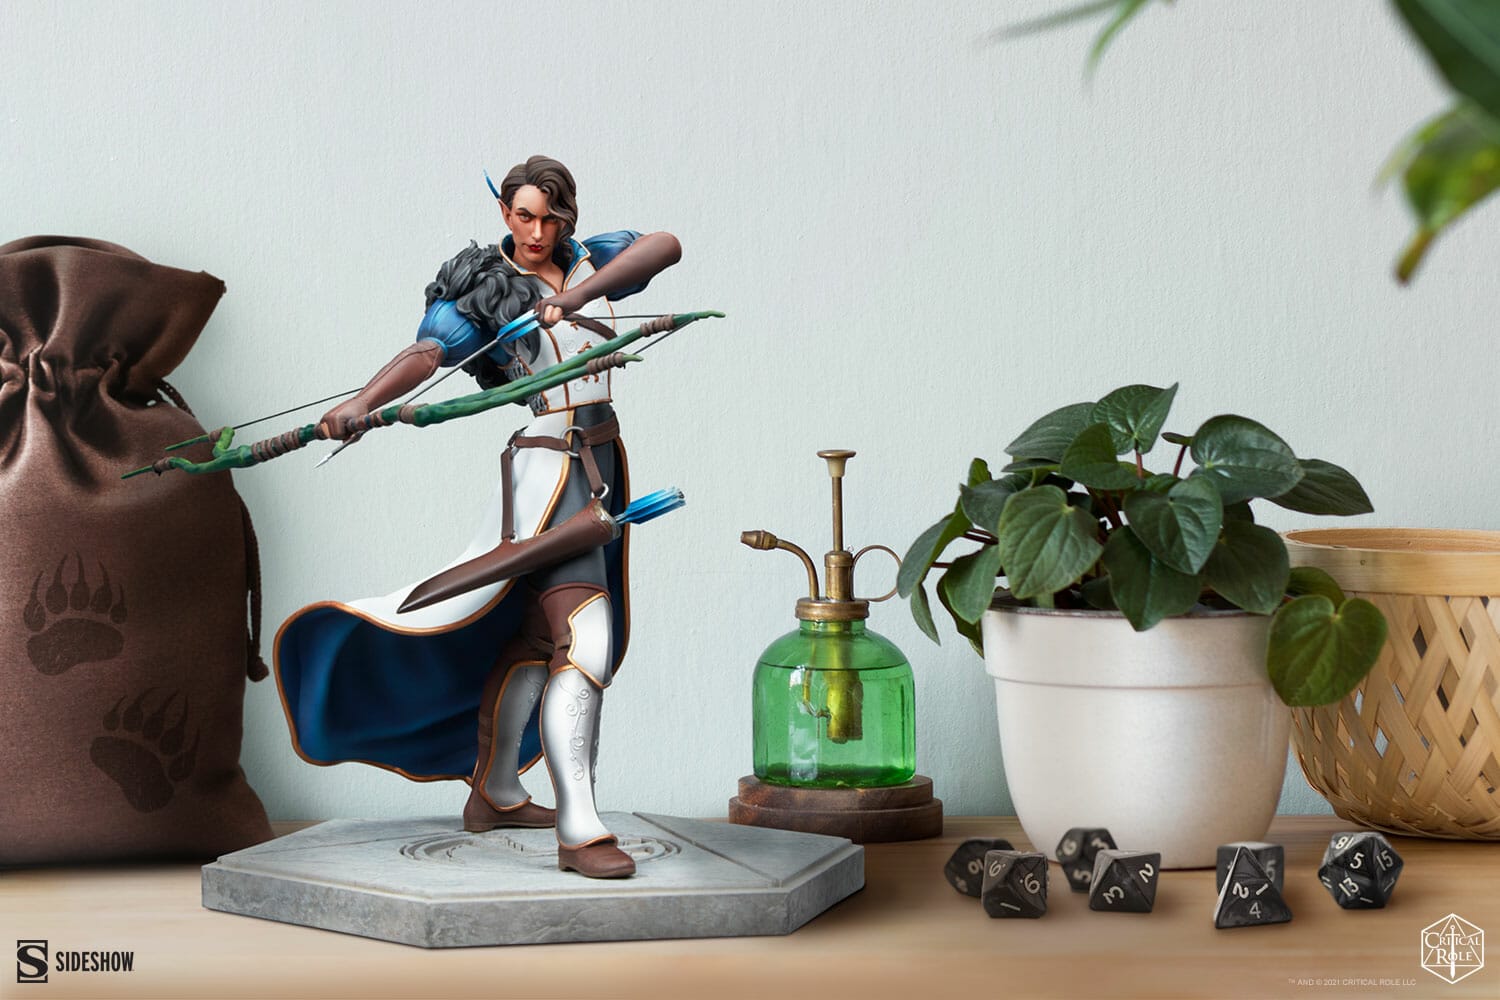 Limited edition Vex model